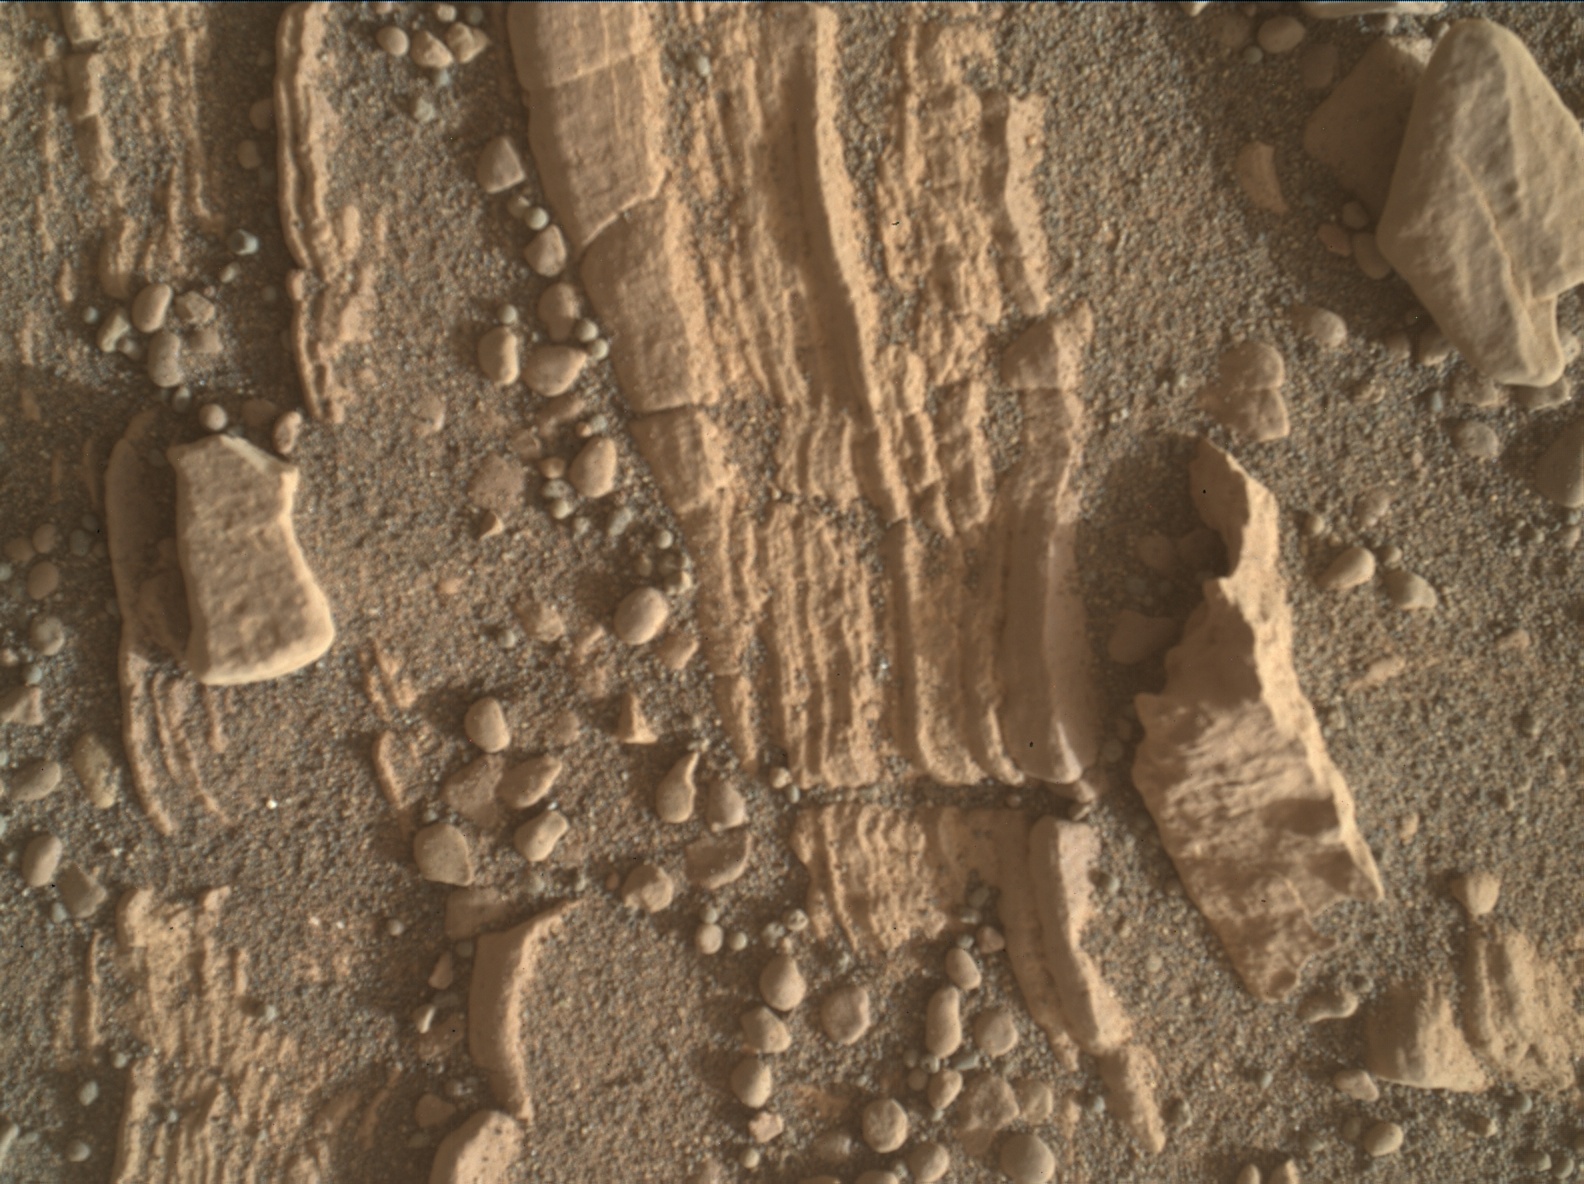 Nasa's Mars rover Curiosity acquired this image using its Mars Hand Lens Imager (MAHLI) on Sol 2427